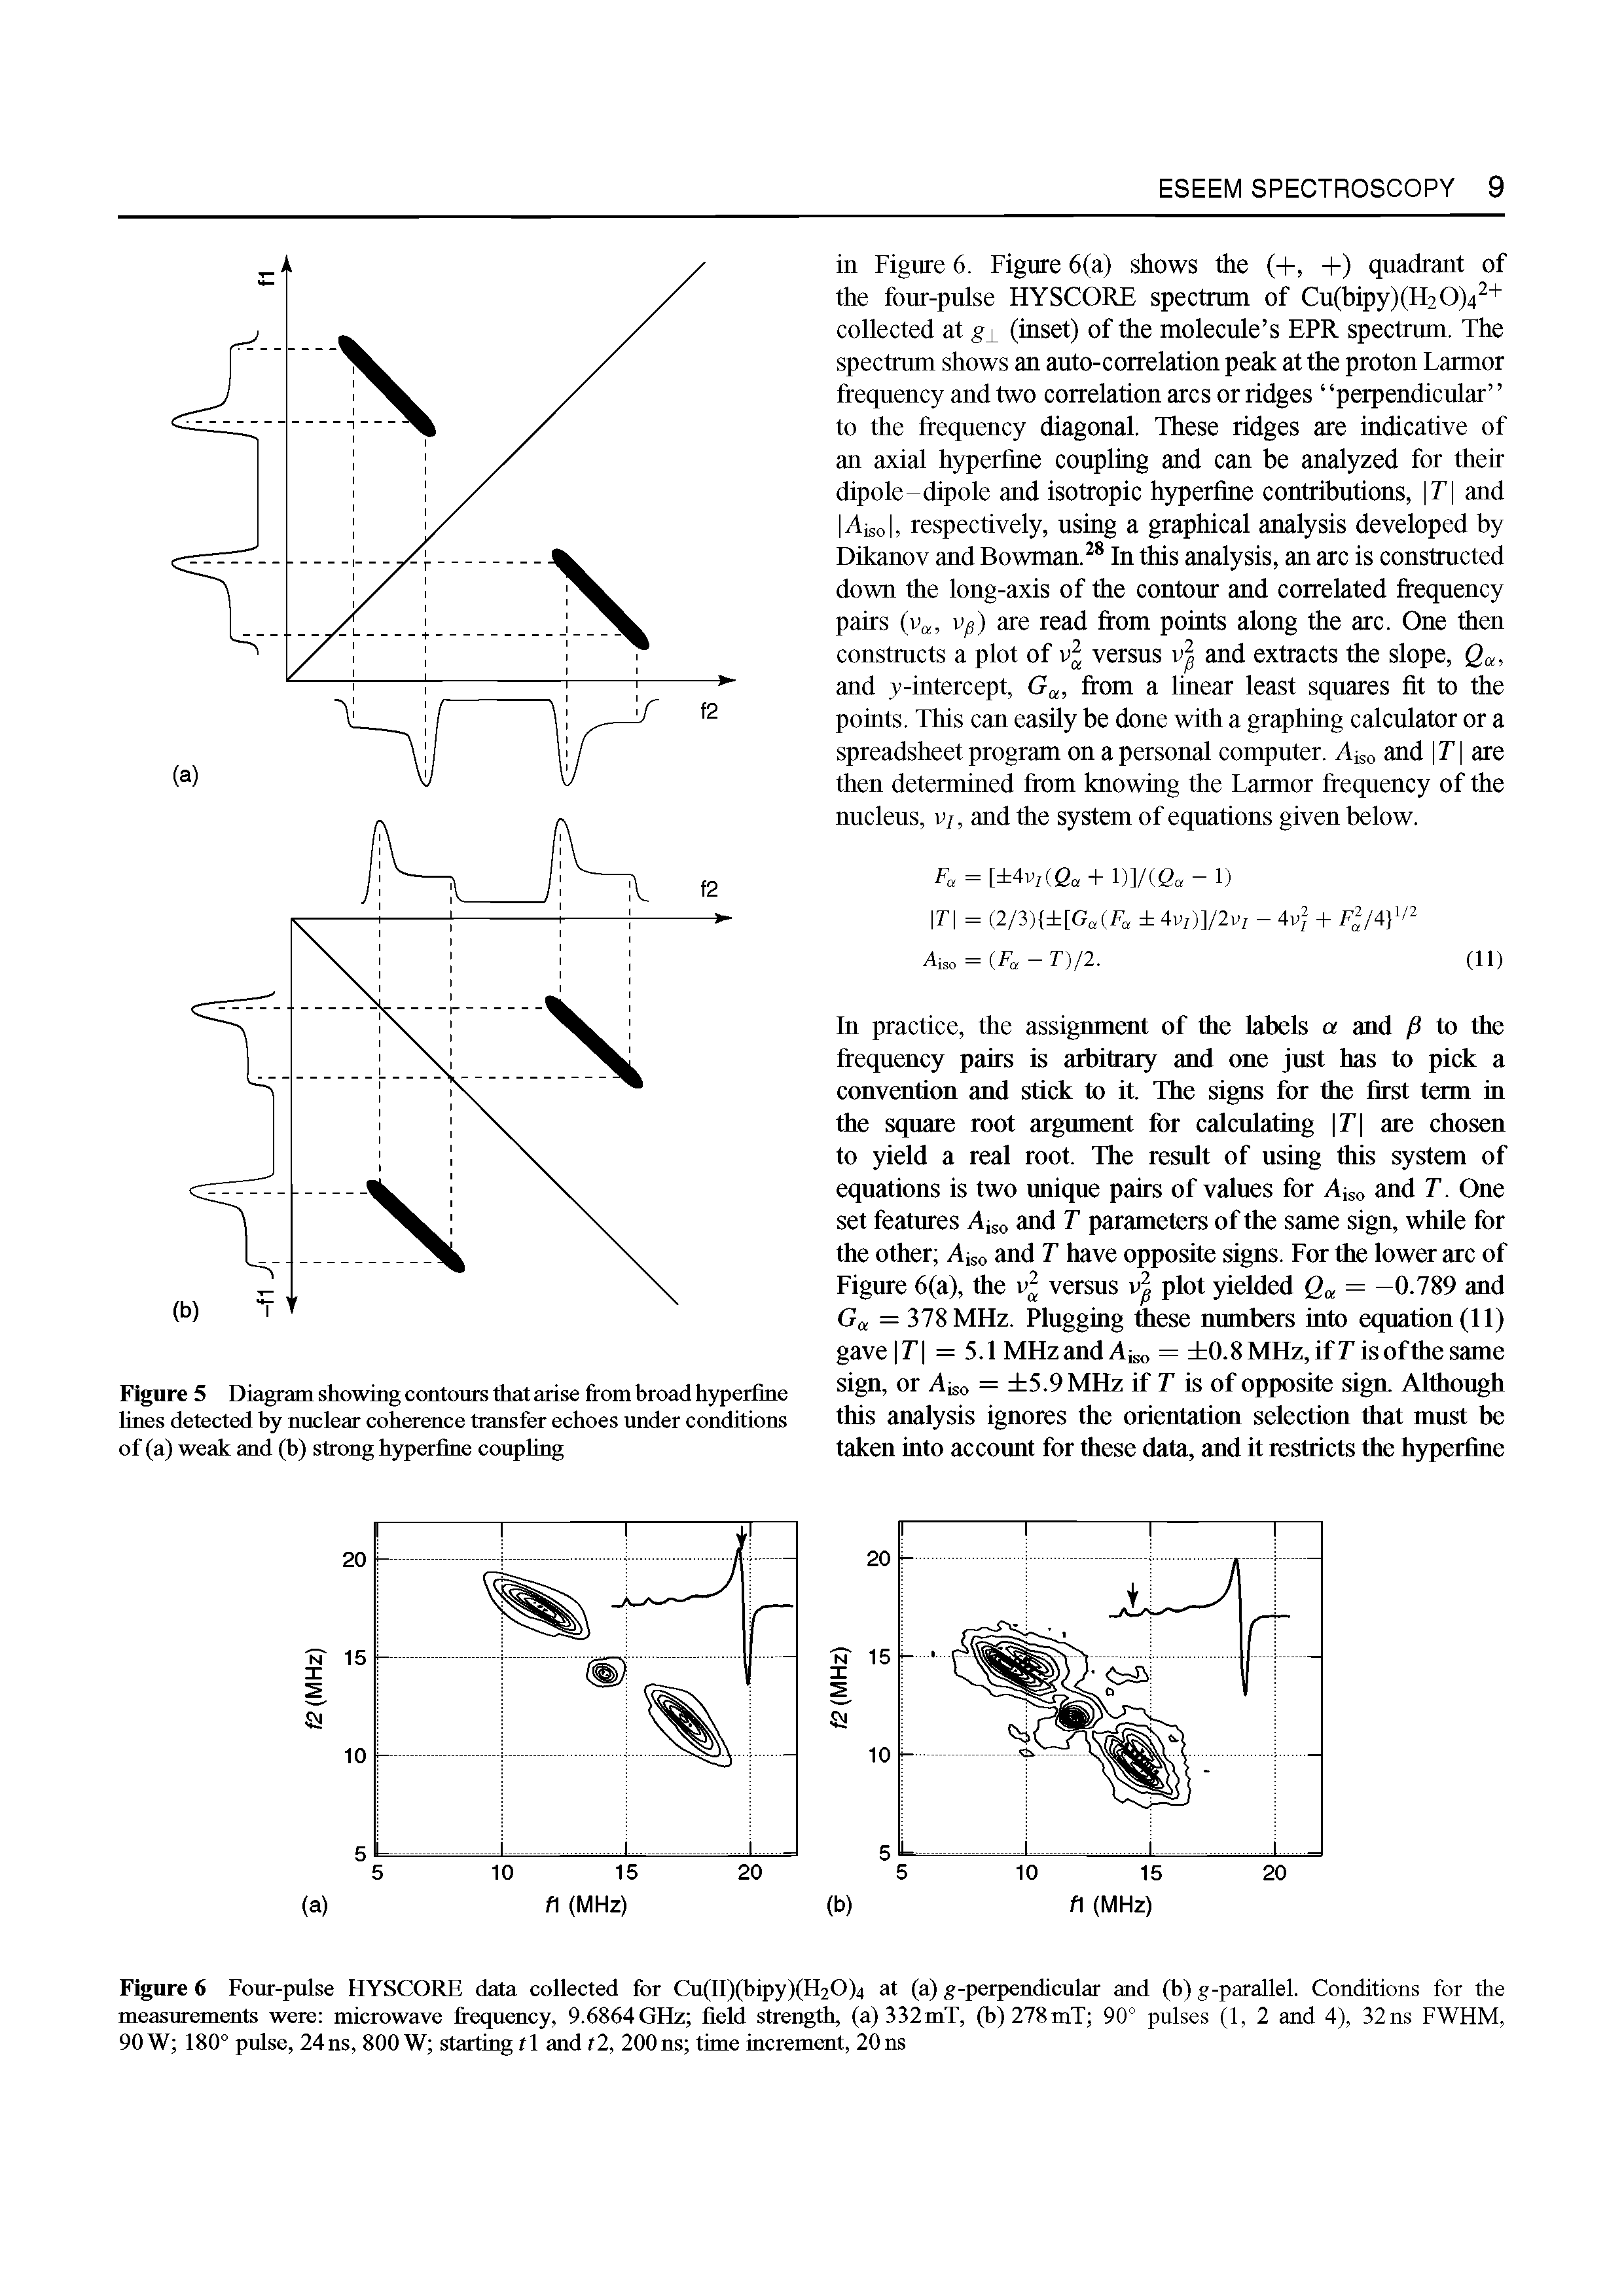 Figure 5 Diagram showing contours that arise from broad hyperfine lines detected hy nuclear coherence transfer echoes under conditions of (a) weak and (h) strong hyperfine coupling...